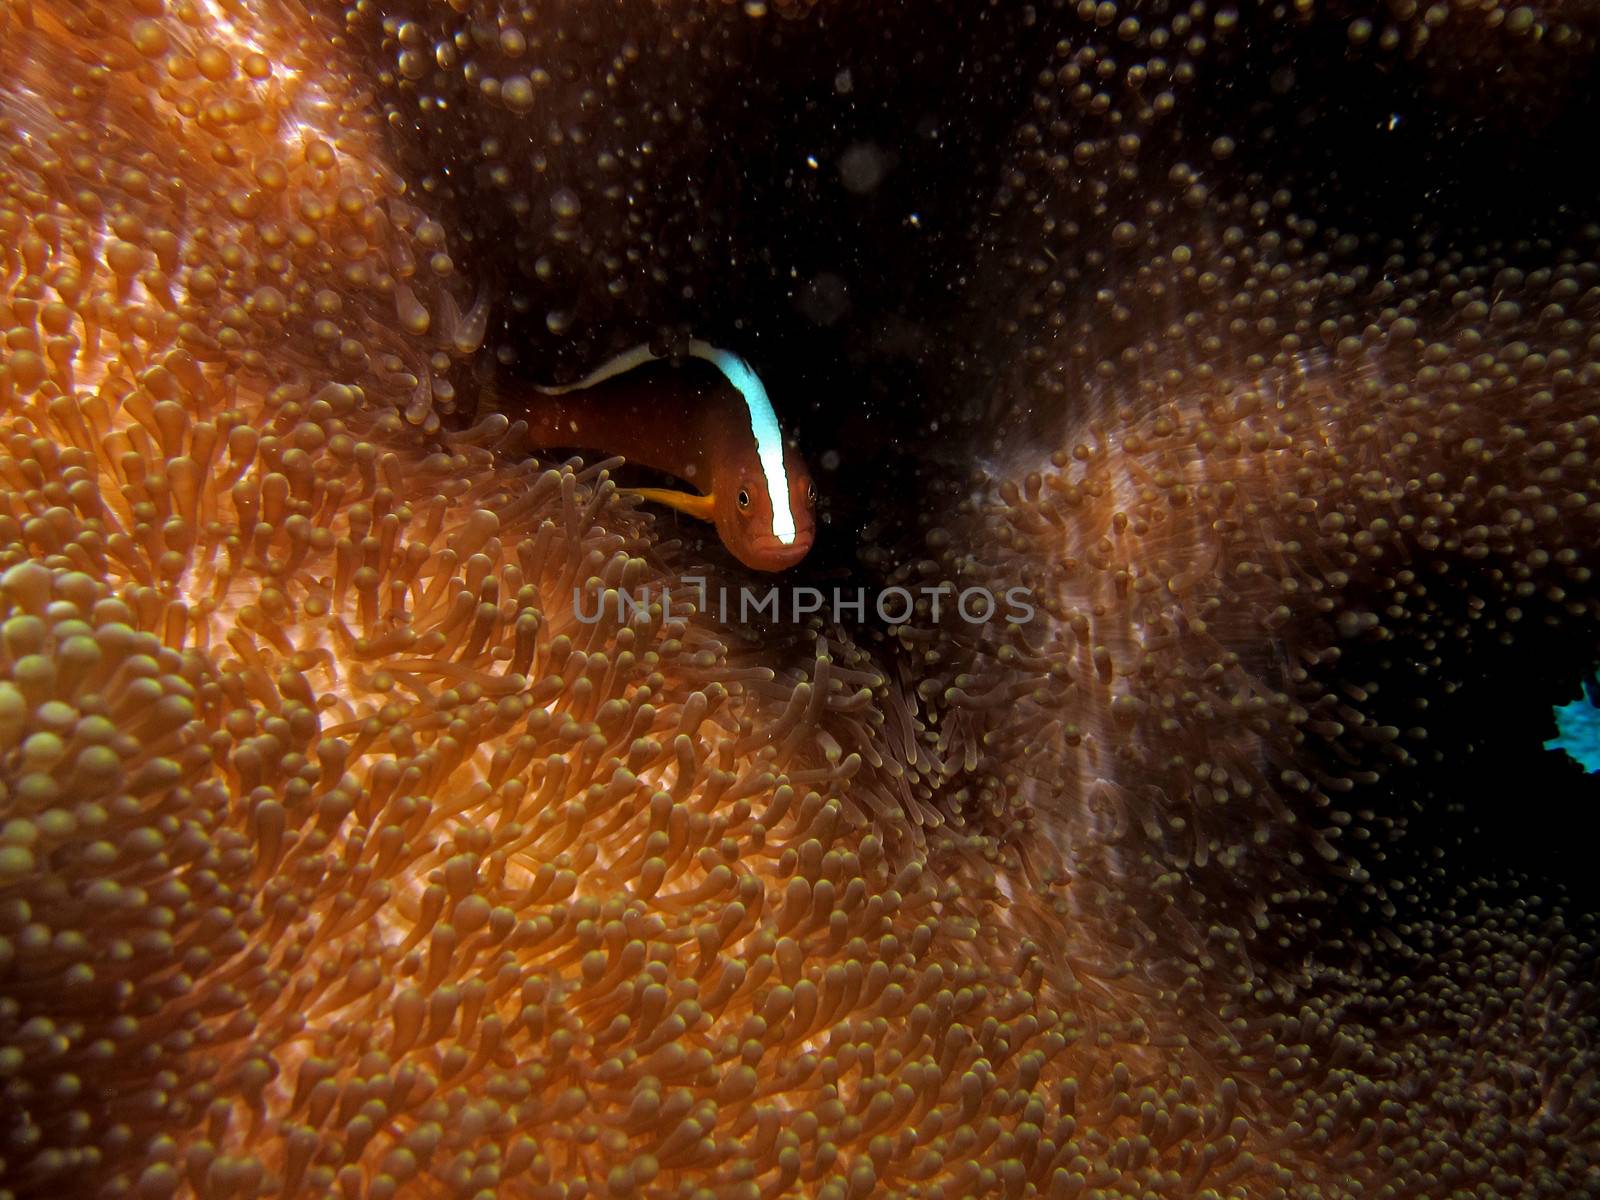 Skunk Anemonefish / Nosestripe Clownfish (Amphiprion akallopisos) in an anemone